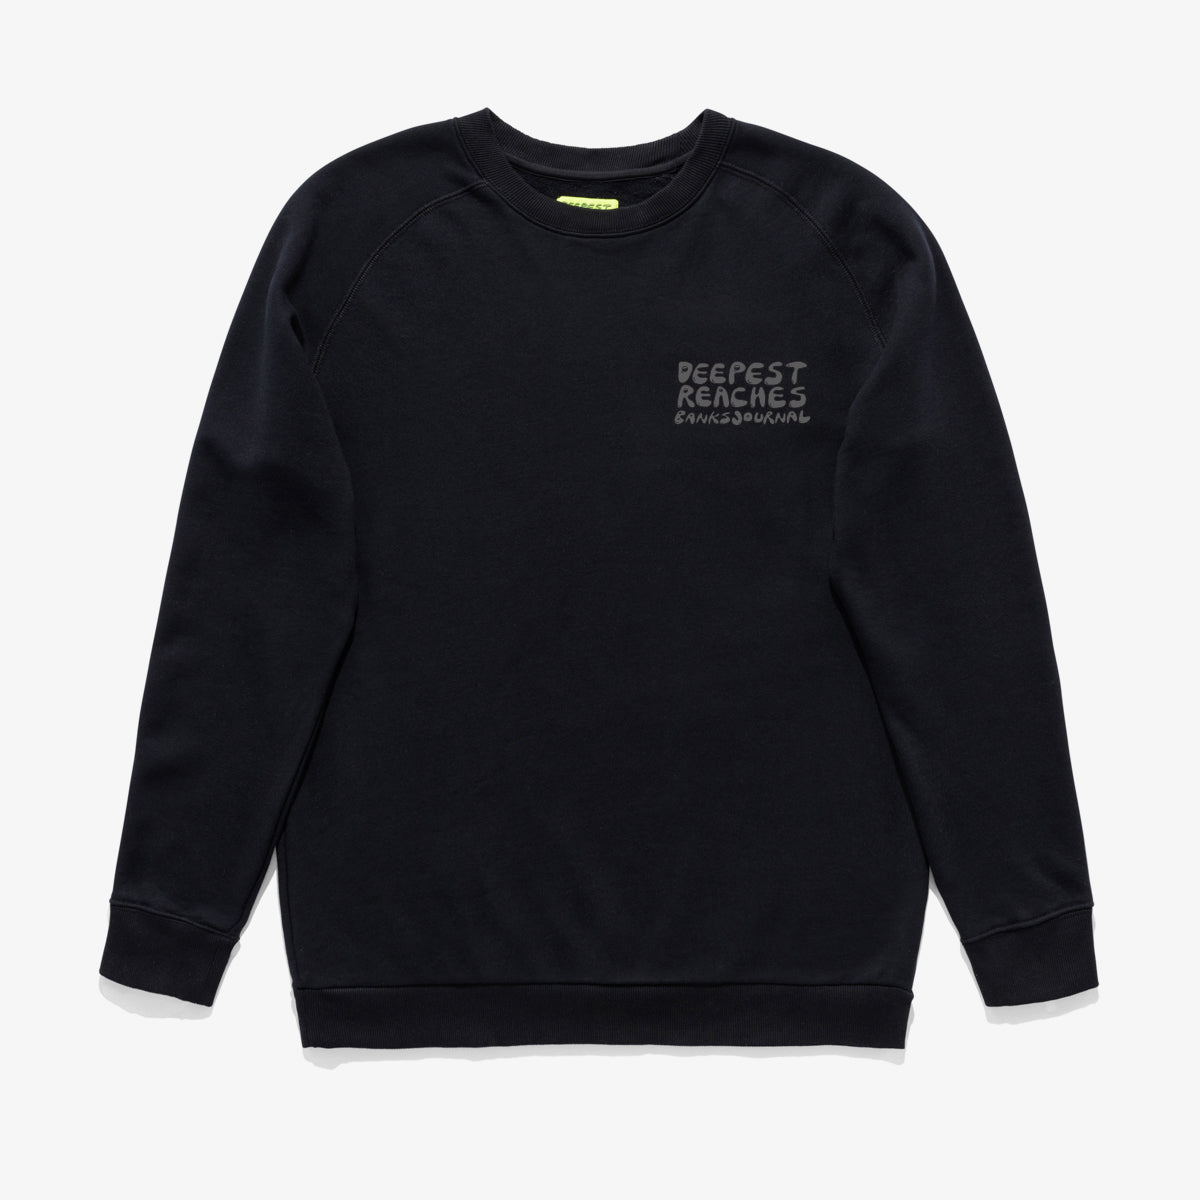 Deepest Reaches Crew Knit